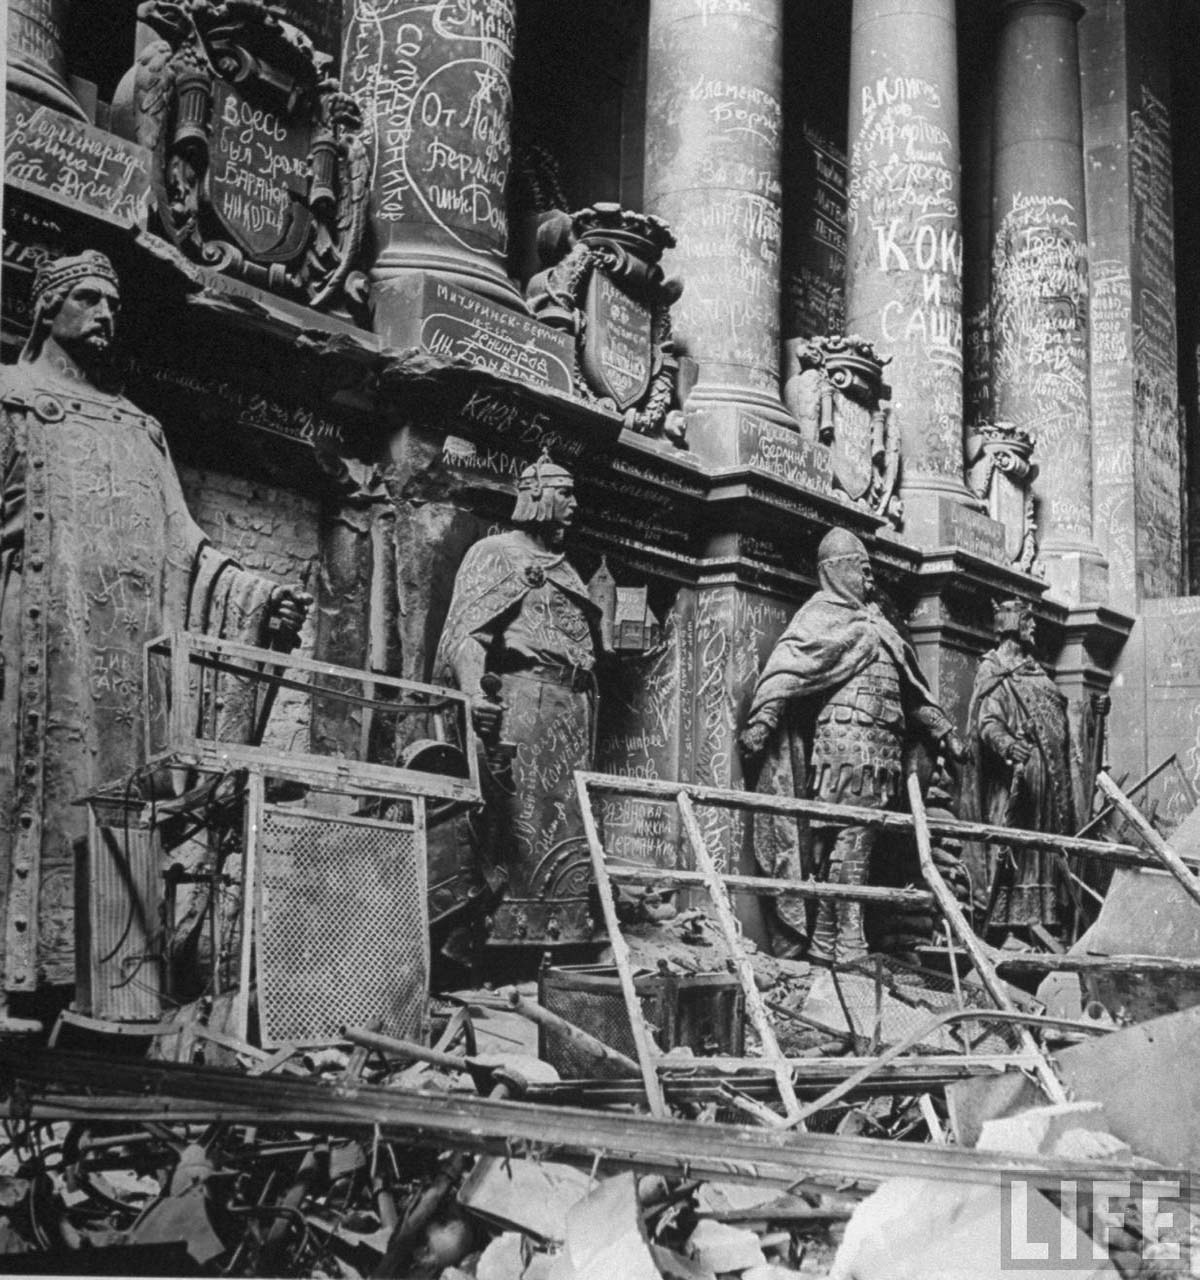 The Reichstag covered in graffiti after being seized from the Nazis by the Red Army, 1945.

After seizing the Reichstag in May 1945 and raising their flag on its roof, Soviet soldiers left their marks in other ways, writing their names, feelings, thoughts and hometowns on the walls of the famous building. Written in Cyrillic script, they include such slogans as “Hitler kaputt” and names of individual soldiers. Most of the writings are just “From [Russian City] to Berlin” or just “[Russian City] – Berlin” with a name or “Kilroyski was here”.